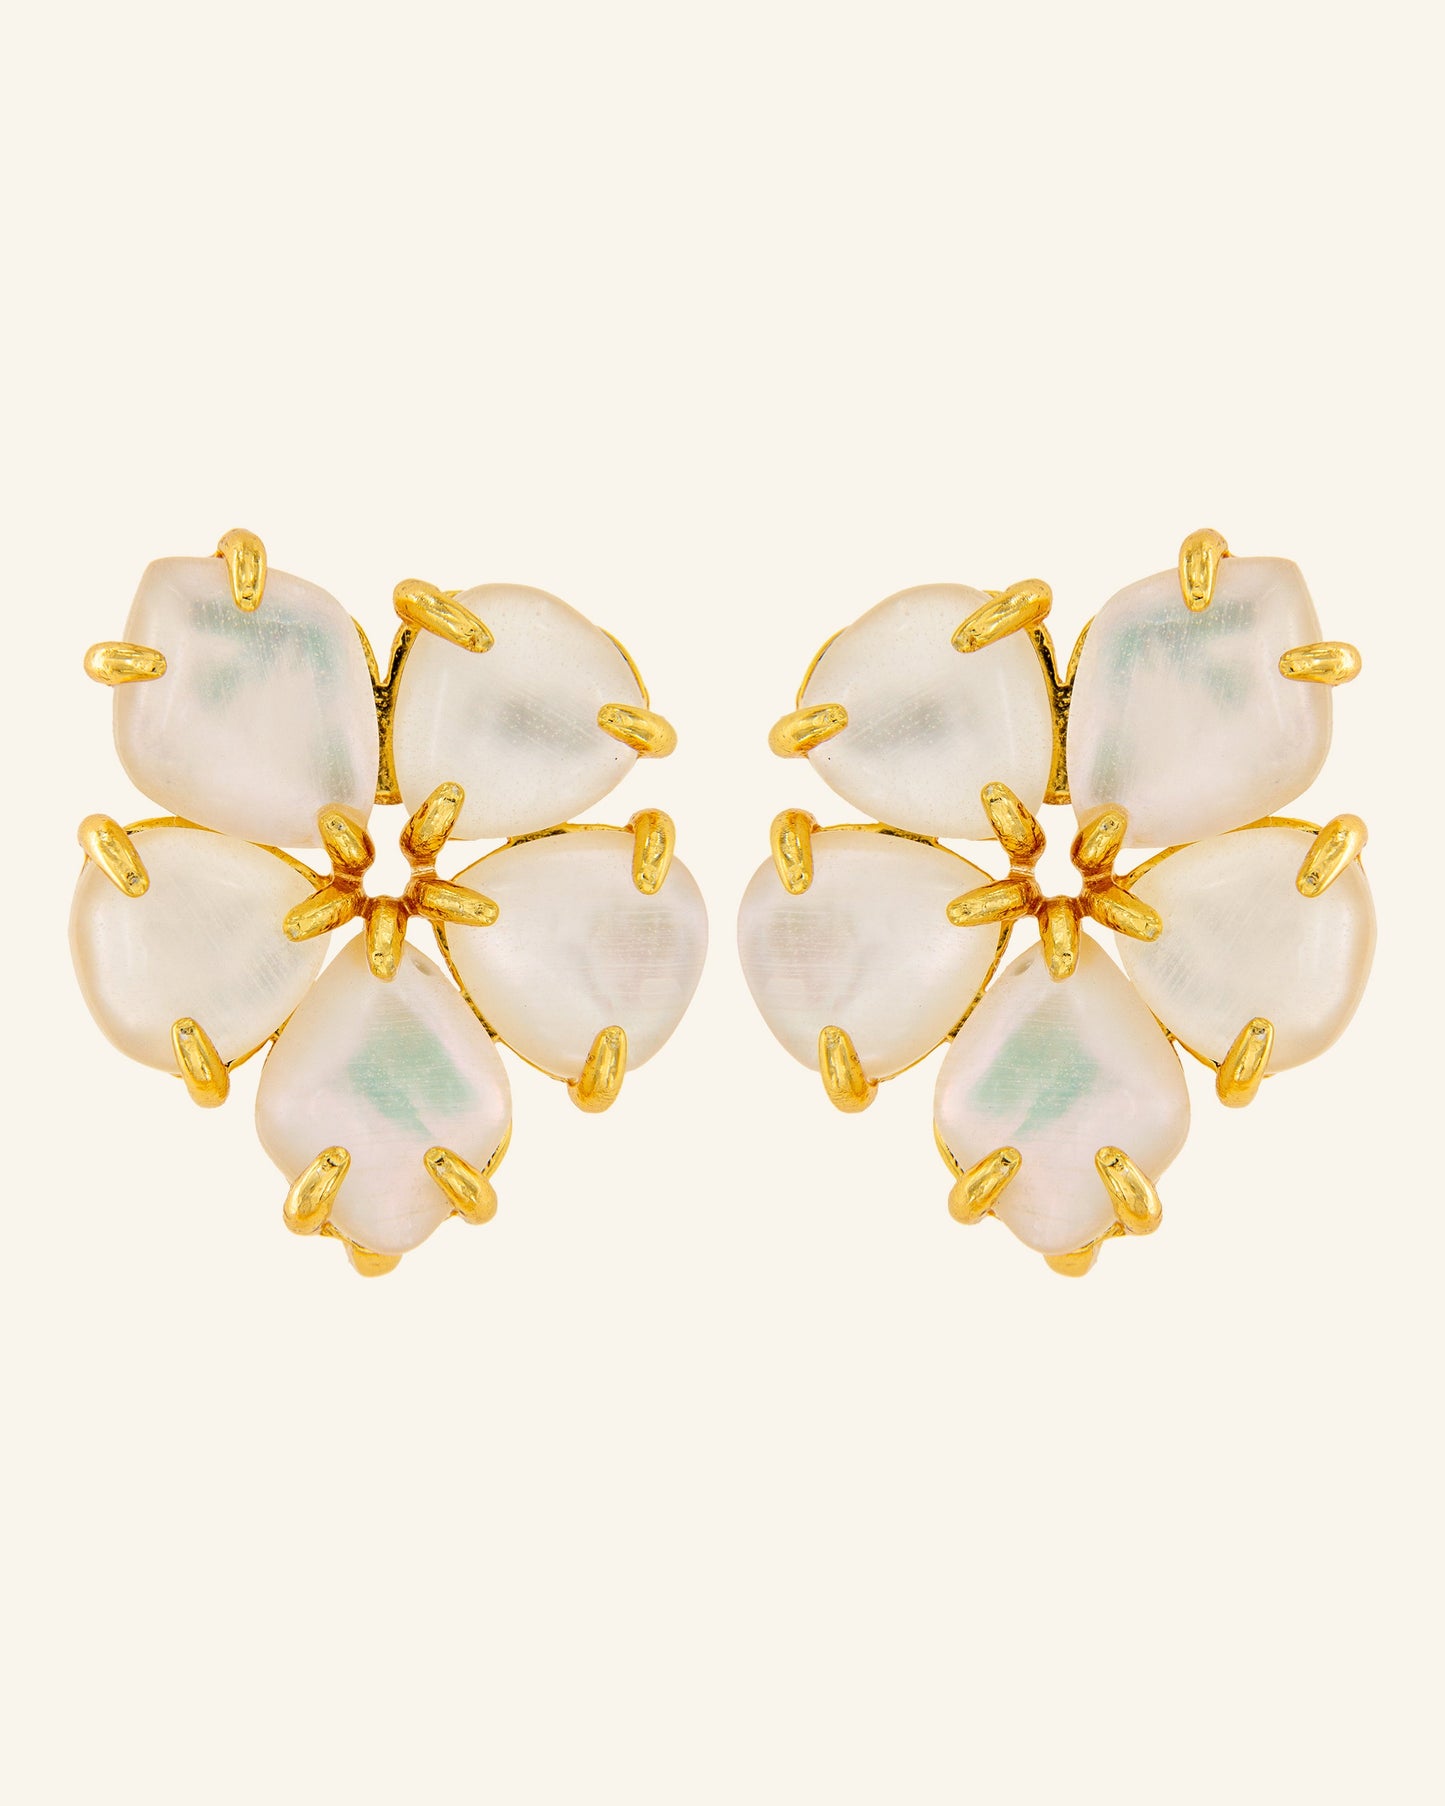 White Mother of Pearl Hibiscus Earrings